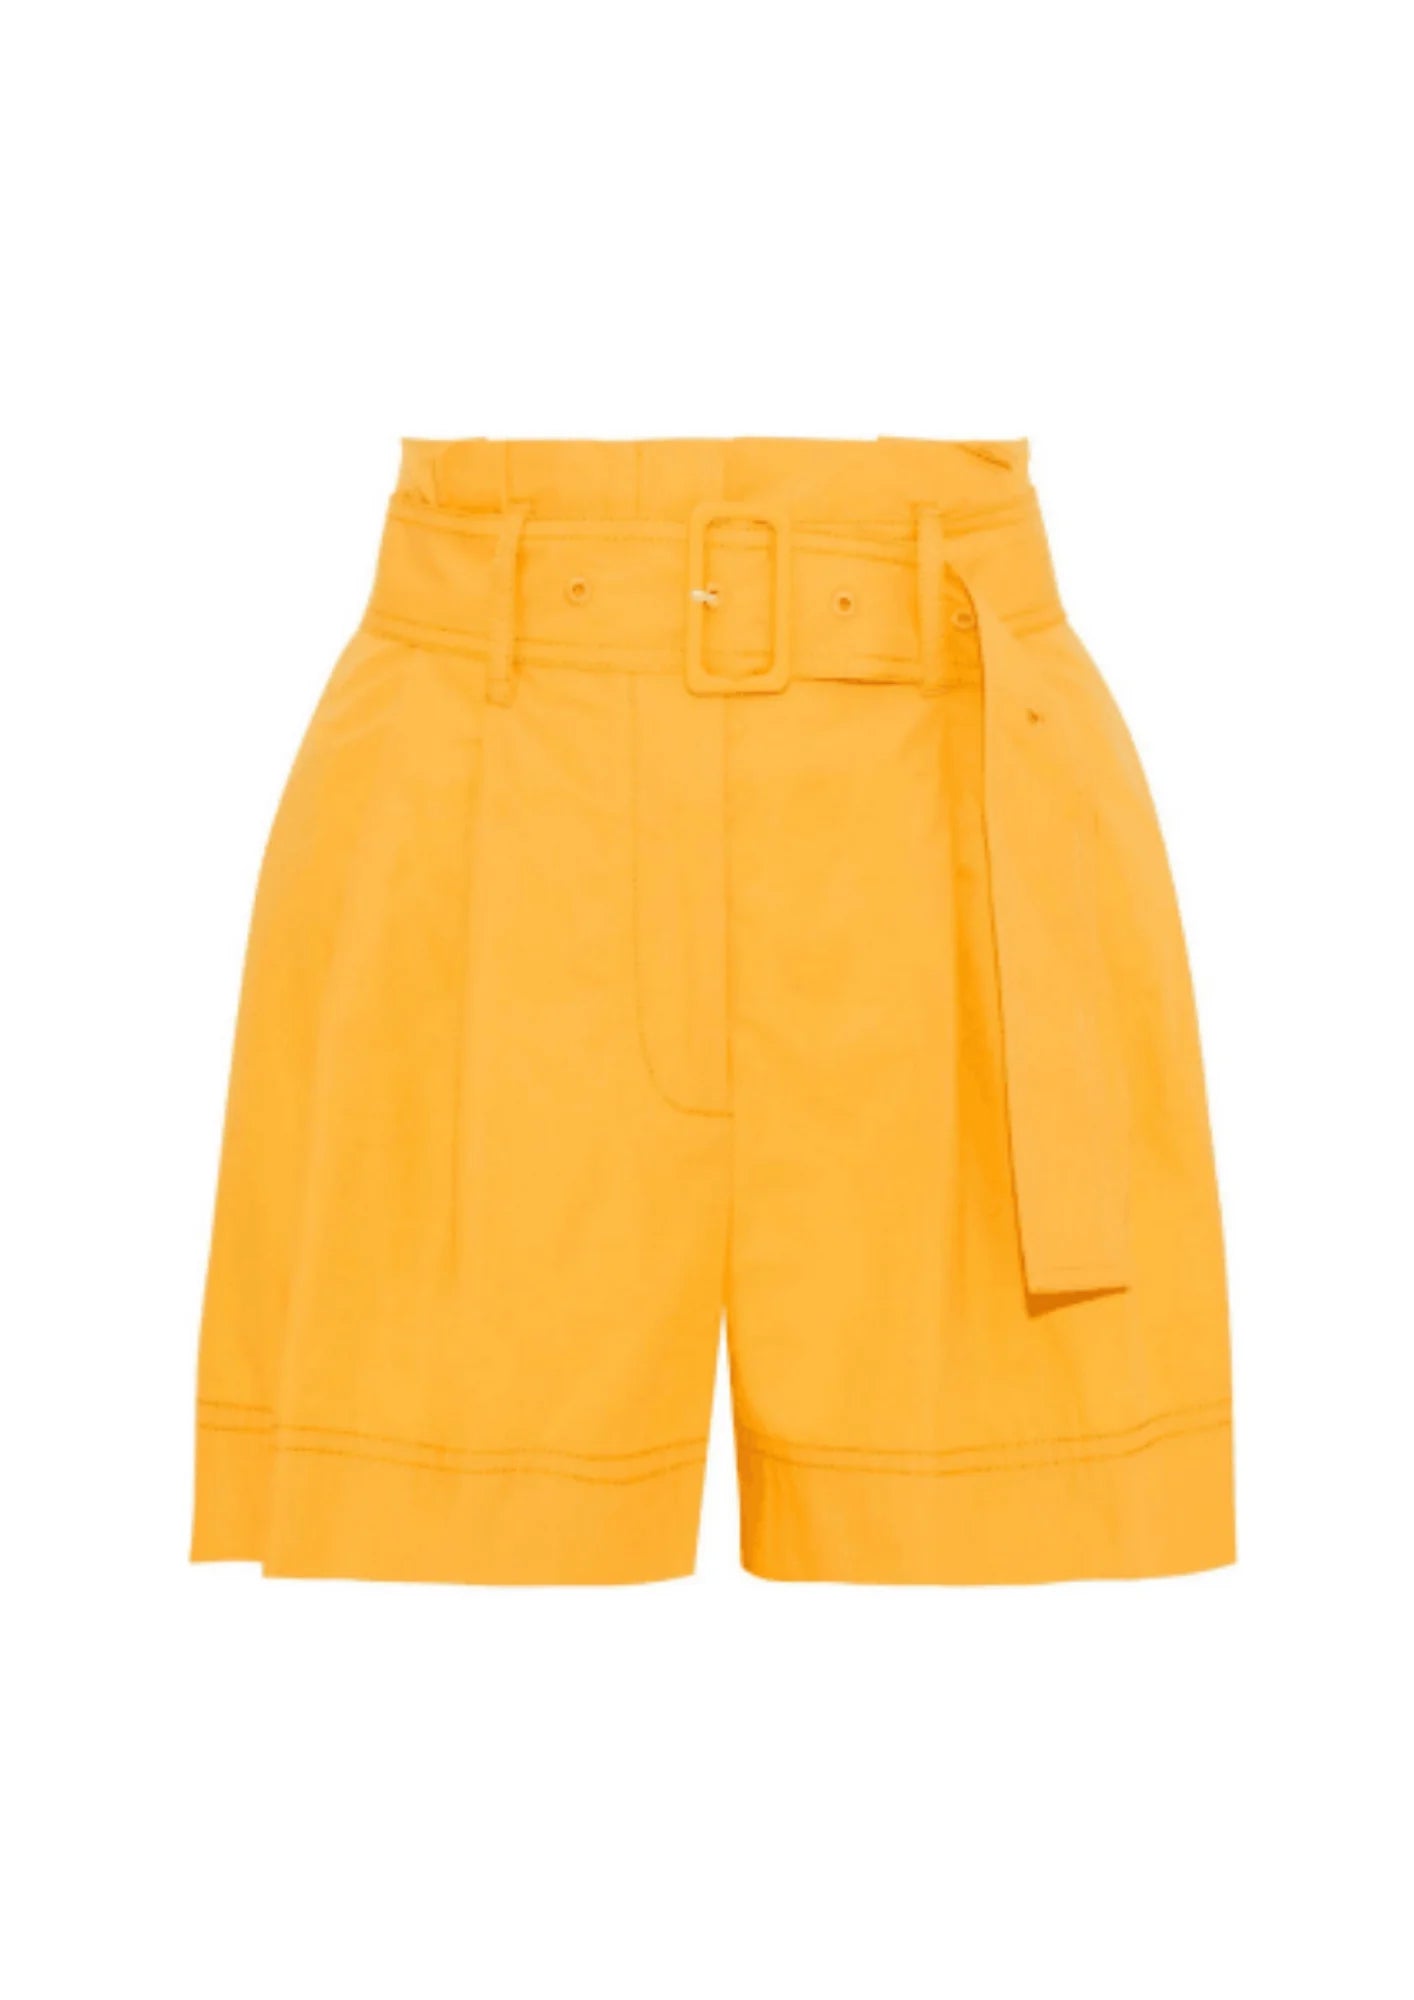 YELLOW BELTED SHORTS